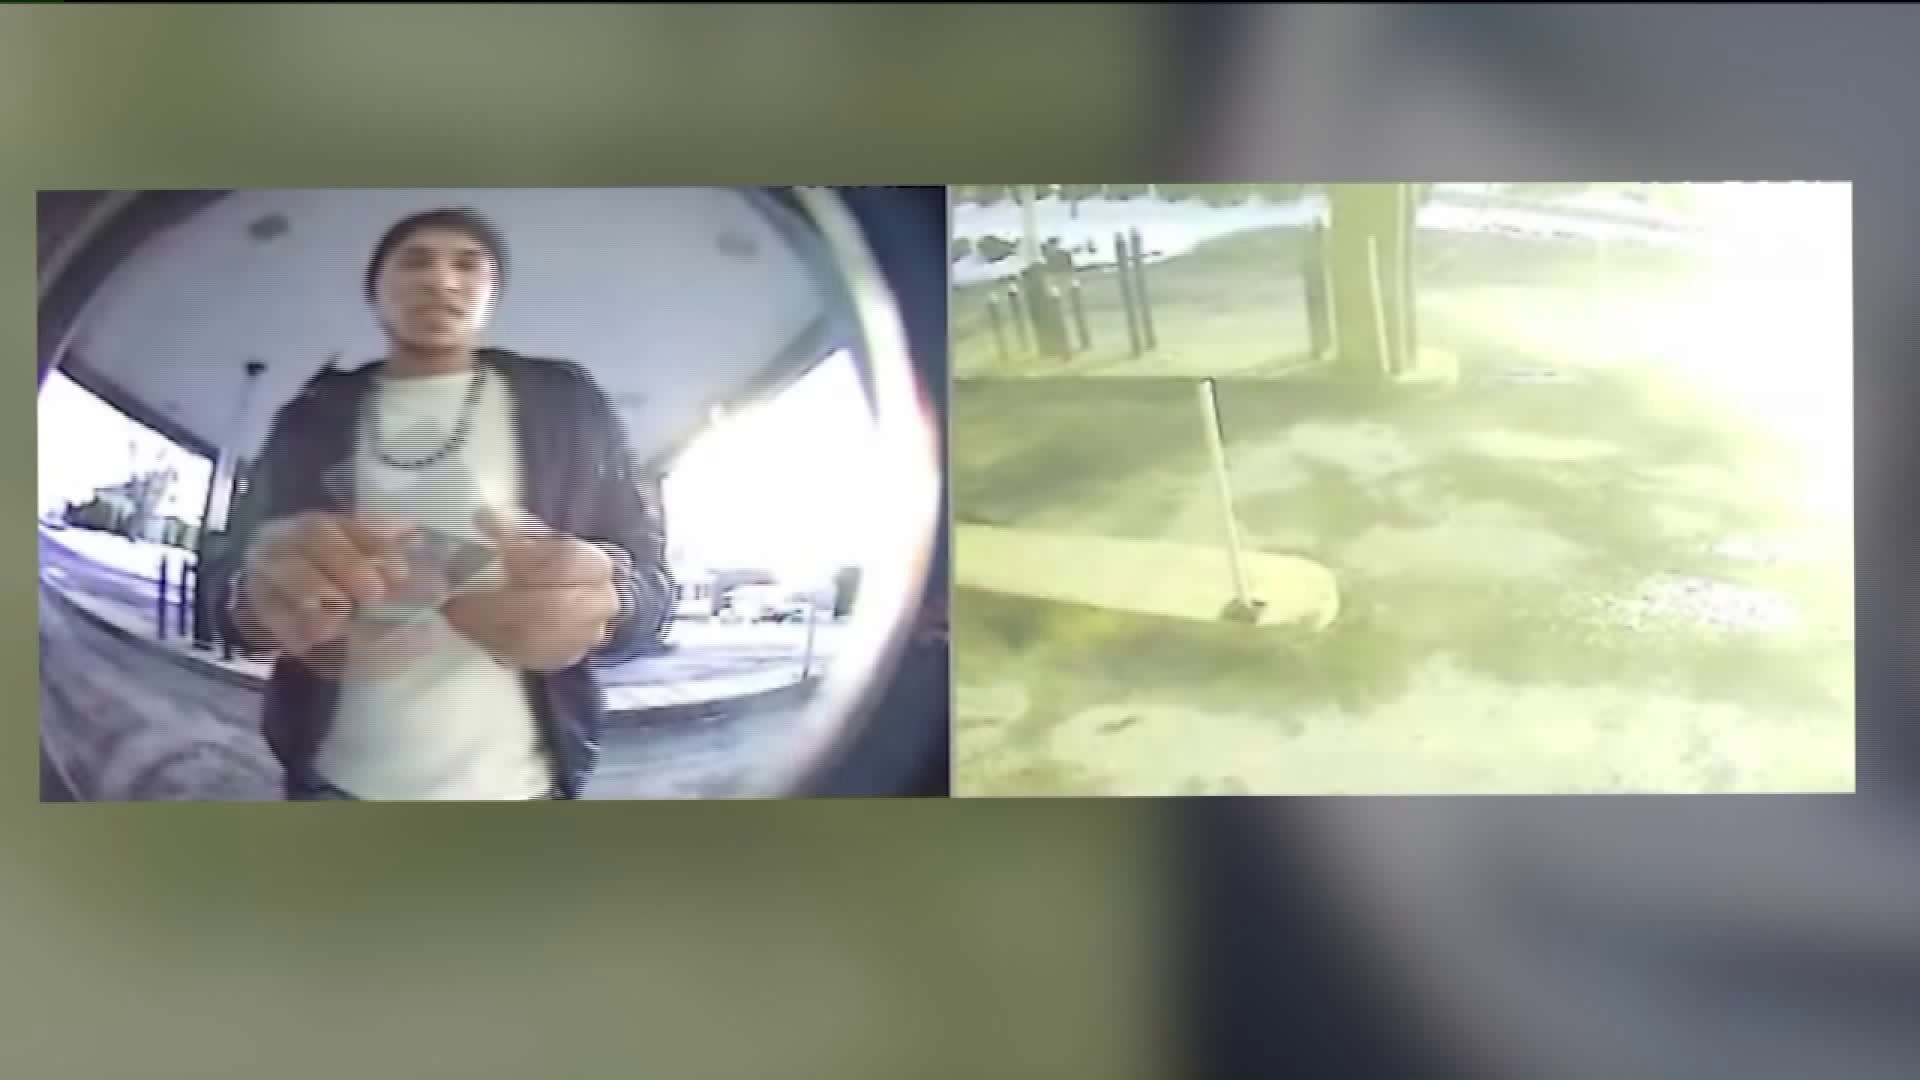 Caught on Camera: Man Tampering with ATM